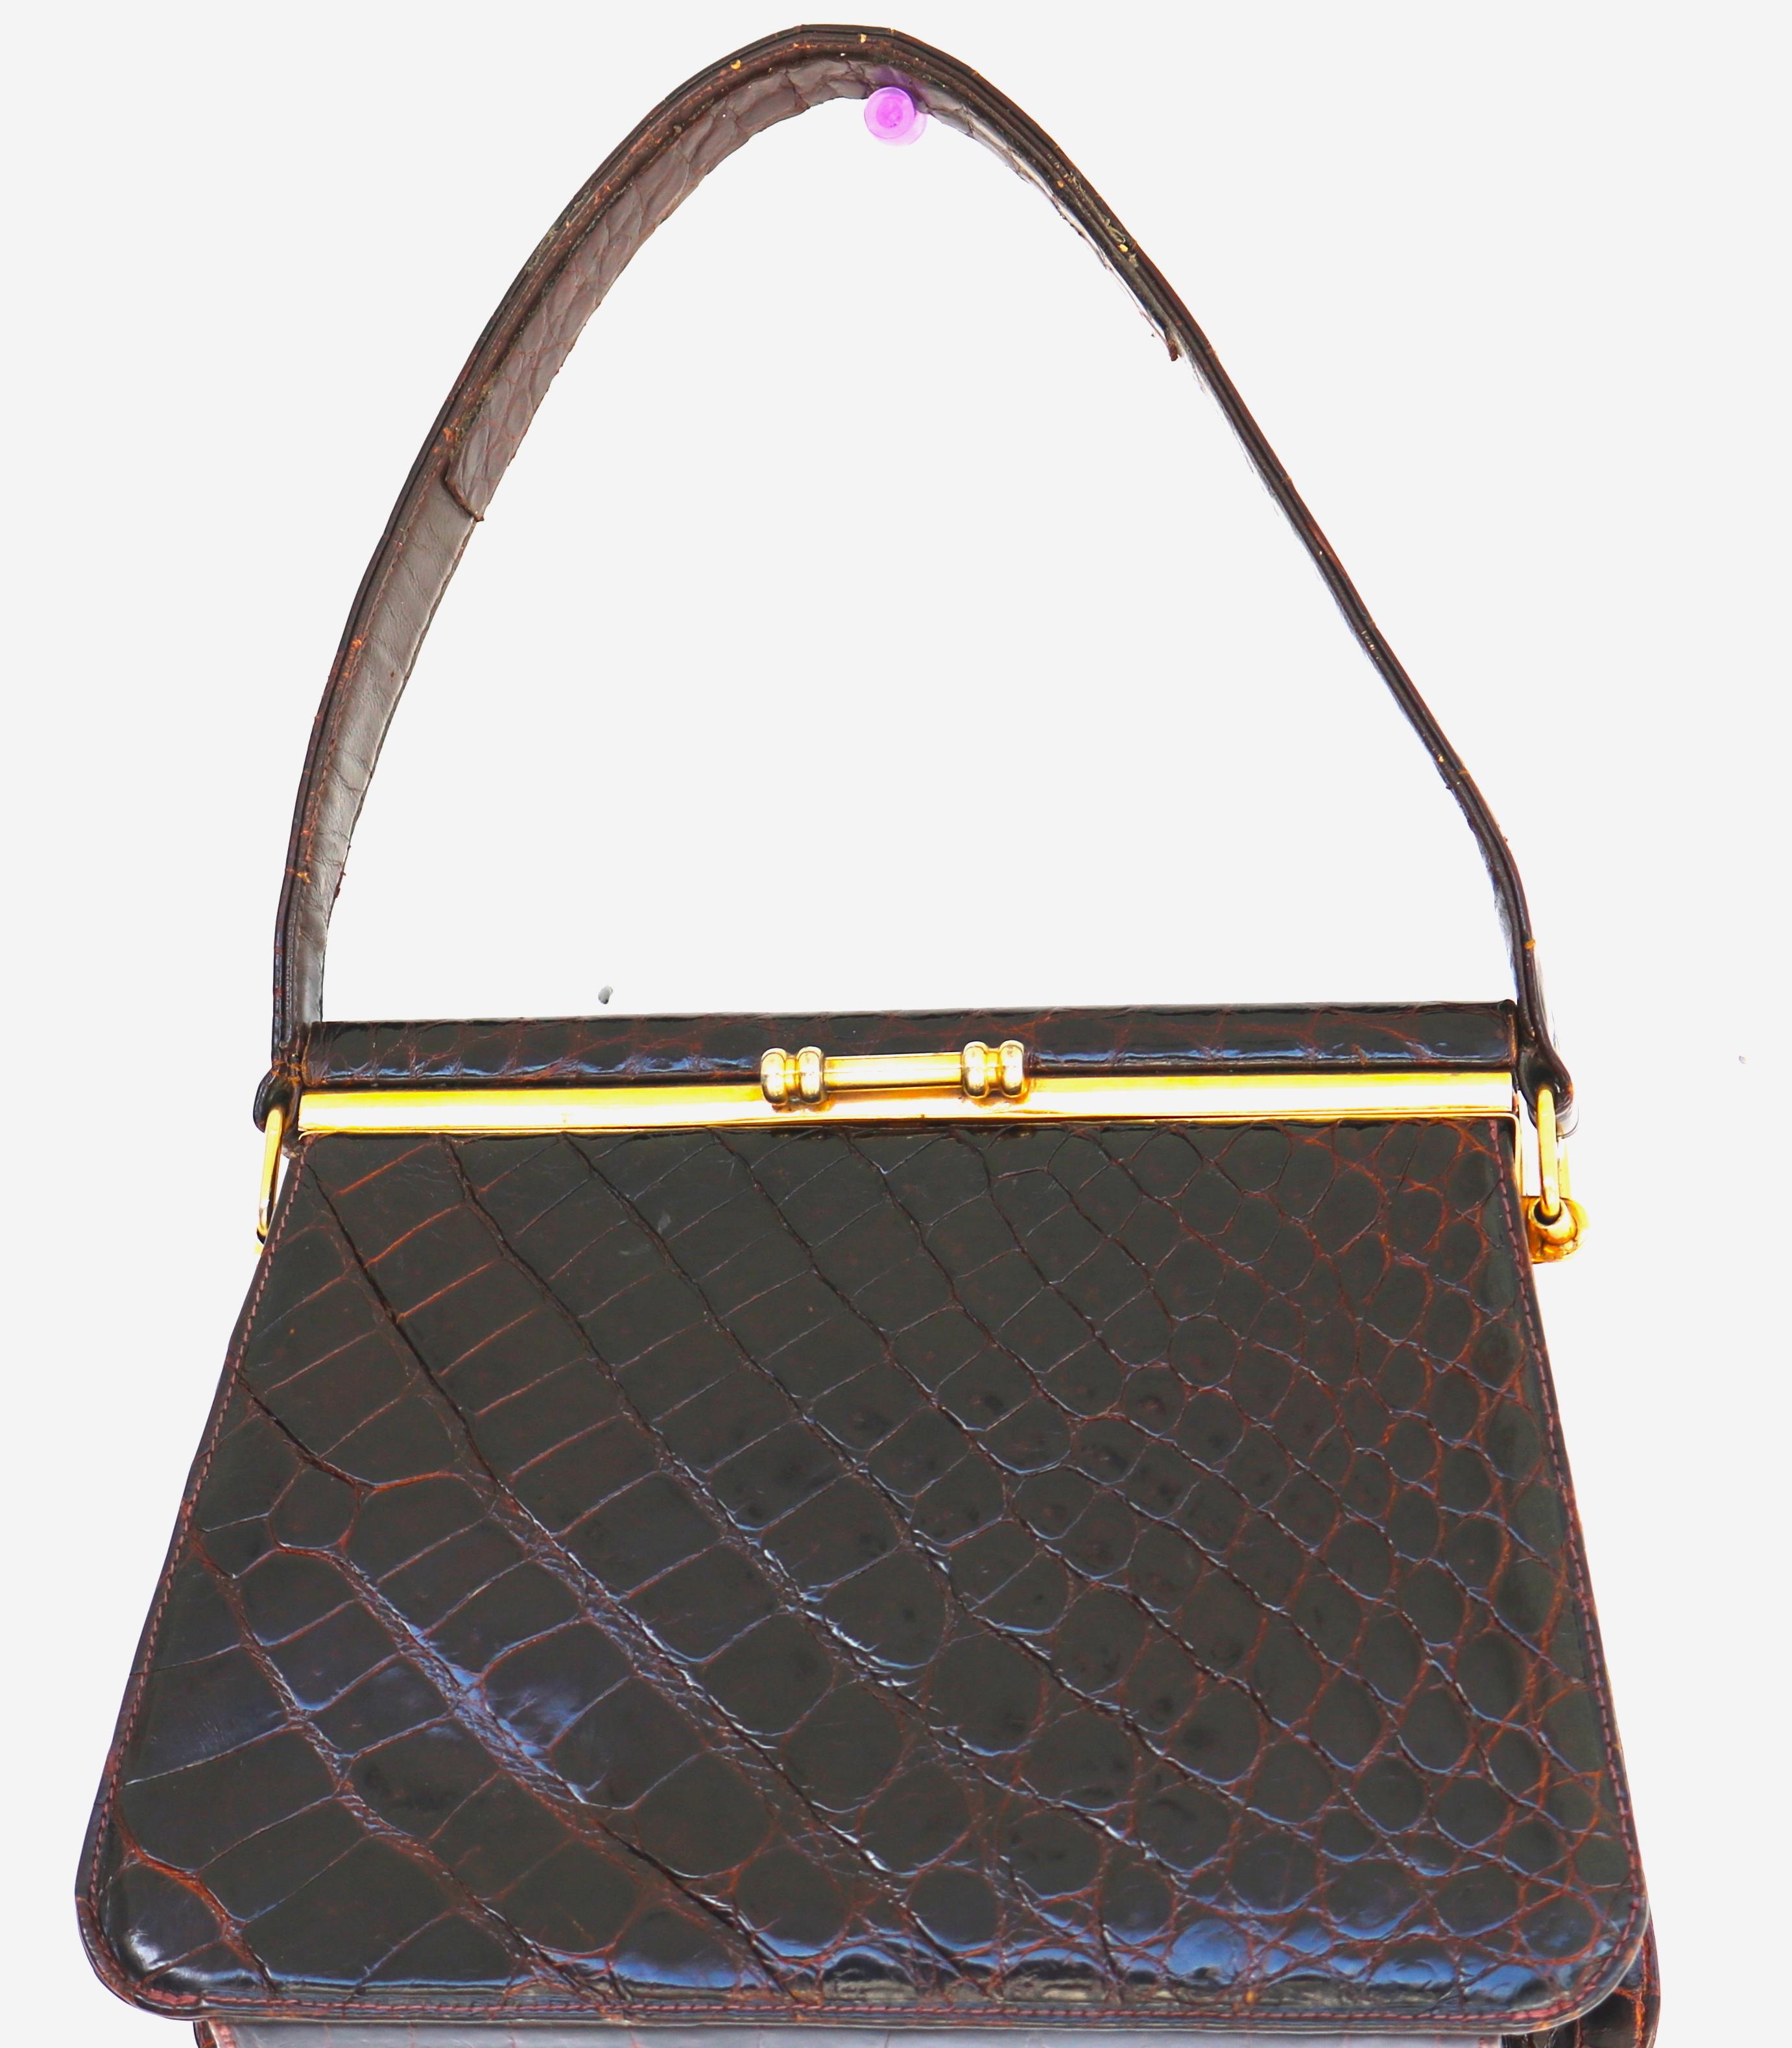 Gorgeous Brown Crocodile Evening Handbag.. Chic and Small Handbag with a Reinforced Strong Croc. Handle-Prepared to Last a Long Time.
Fabricated by the finest designer handbag maker with the finest details, 
without label.
A gold plate frame